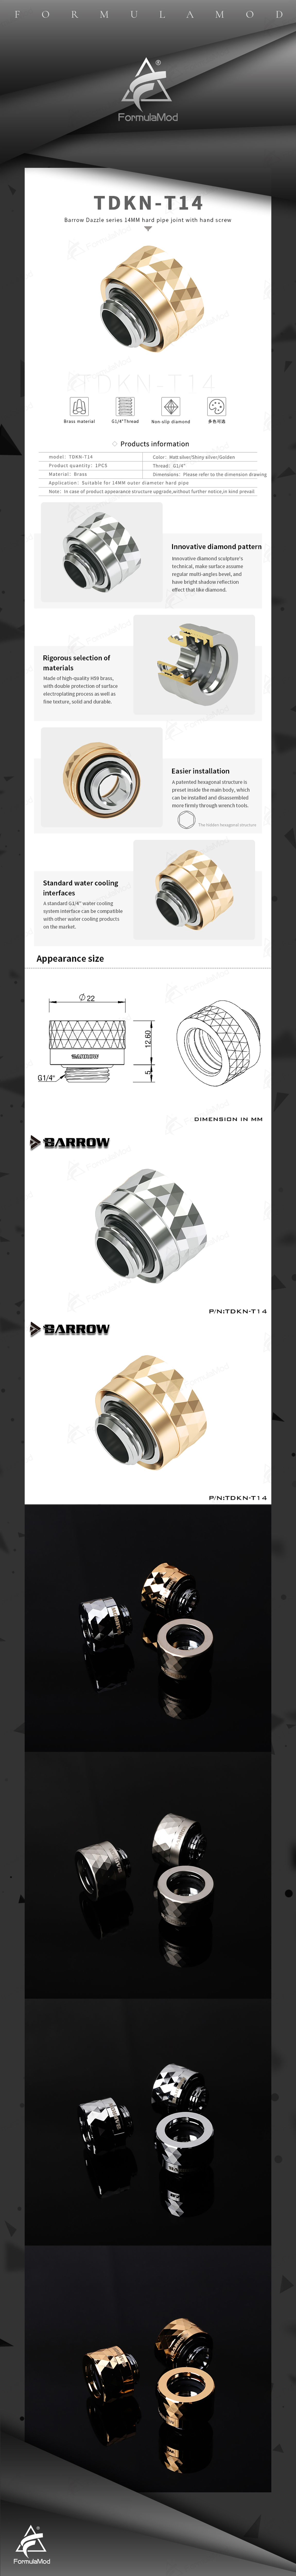 Barrow Choice Smooth OD14mm Hard Tube Fitting Hand Compression Fitting G1/4'' OD14mm Hard Pipe,TDKN-T14  